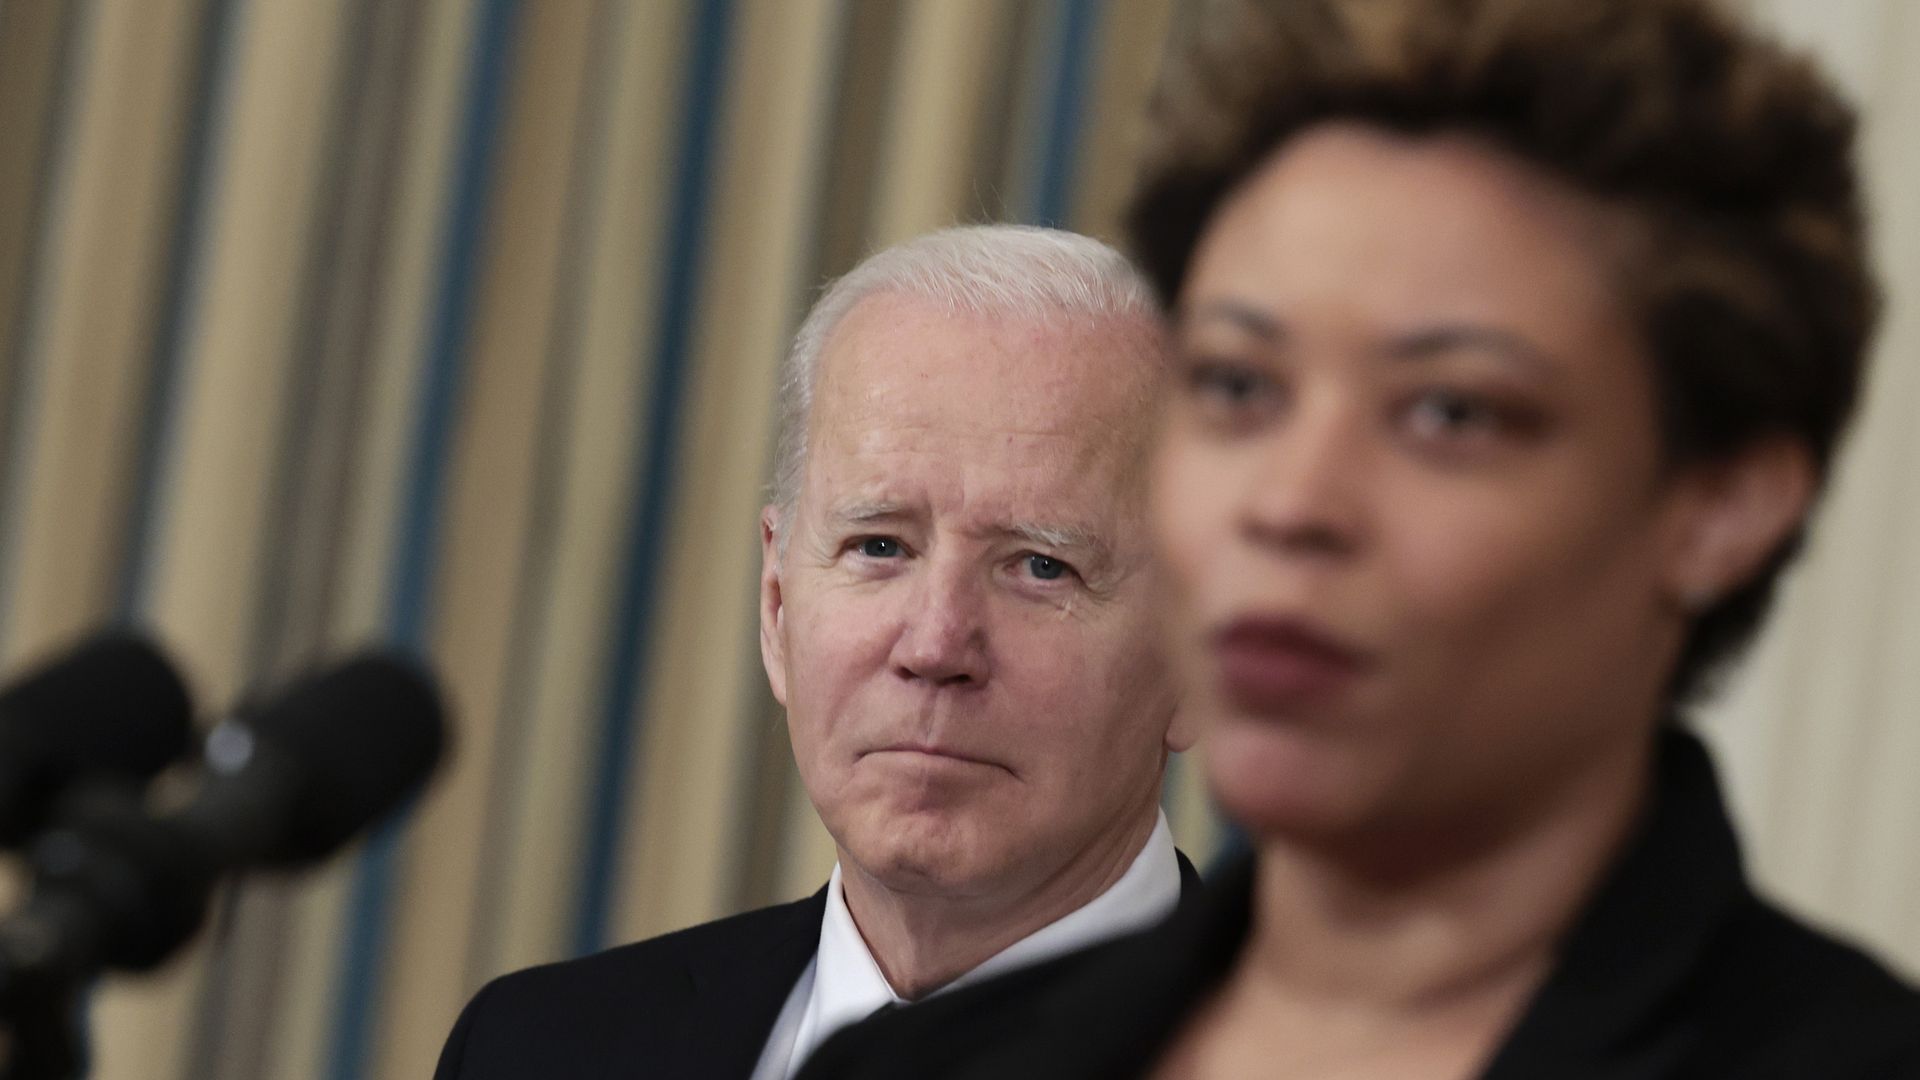 President Biden is seen looking on as OMB Director Shalanda Young speaks about the budget on Monday.